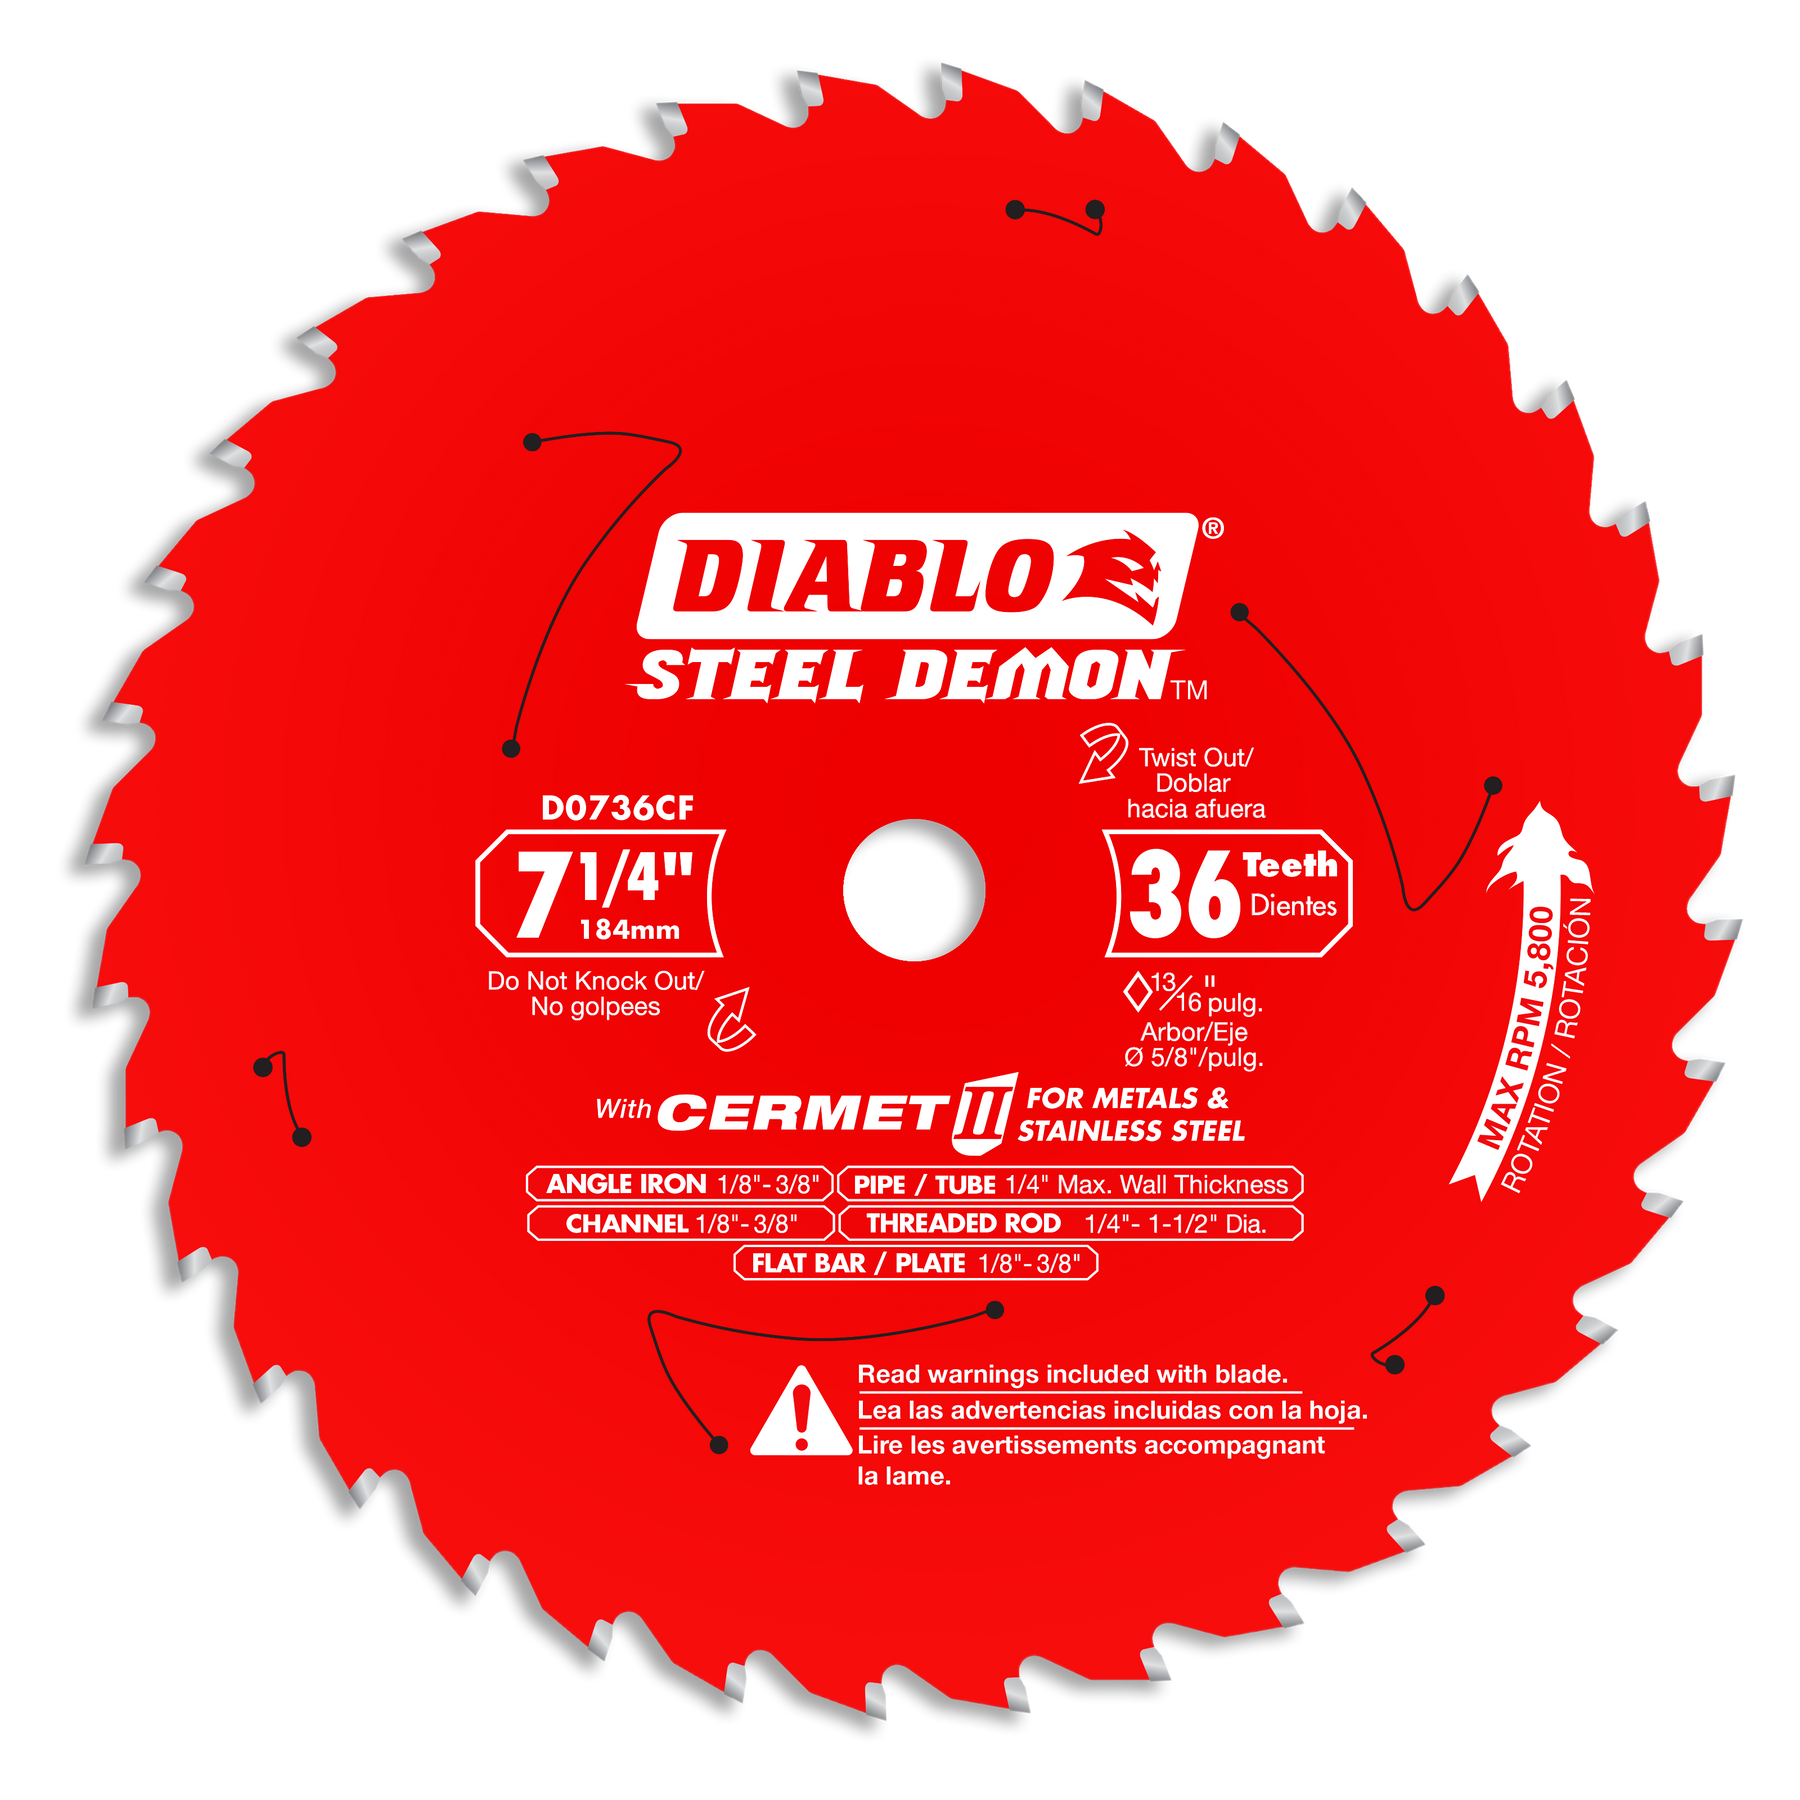 Diablo Steel Demon Carbide-Tipped Saw Blade for Thick Metal